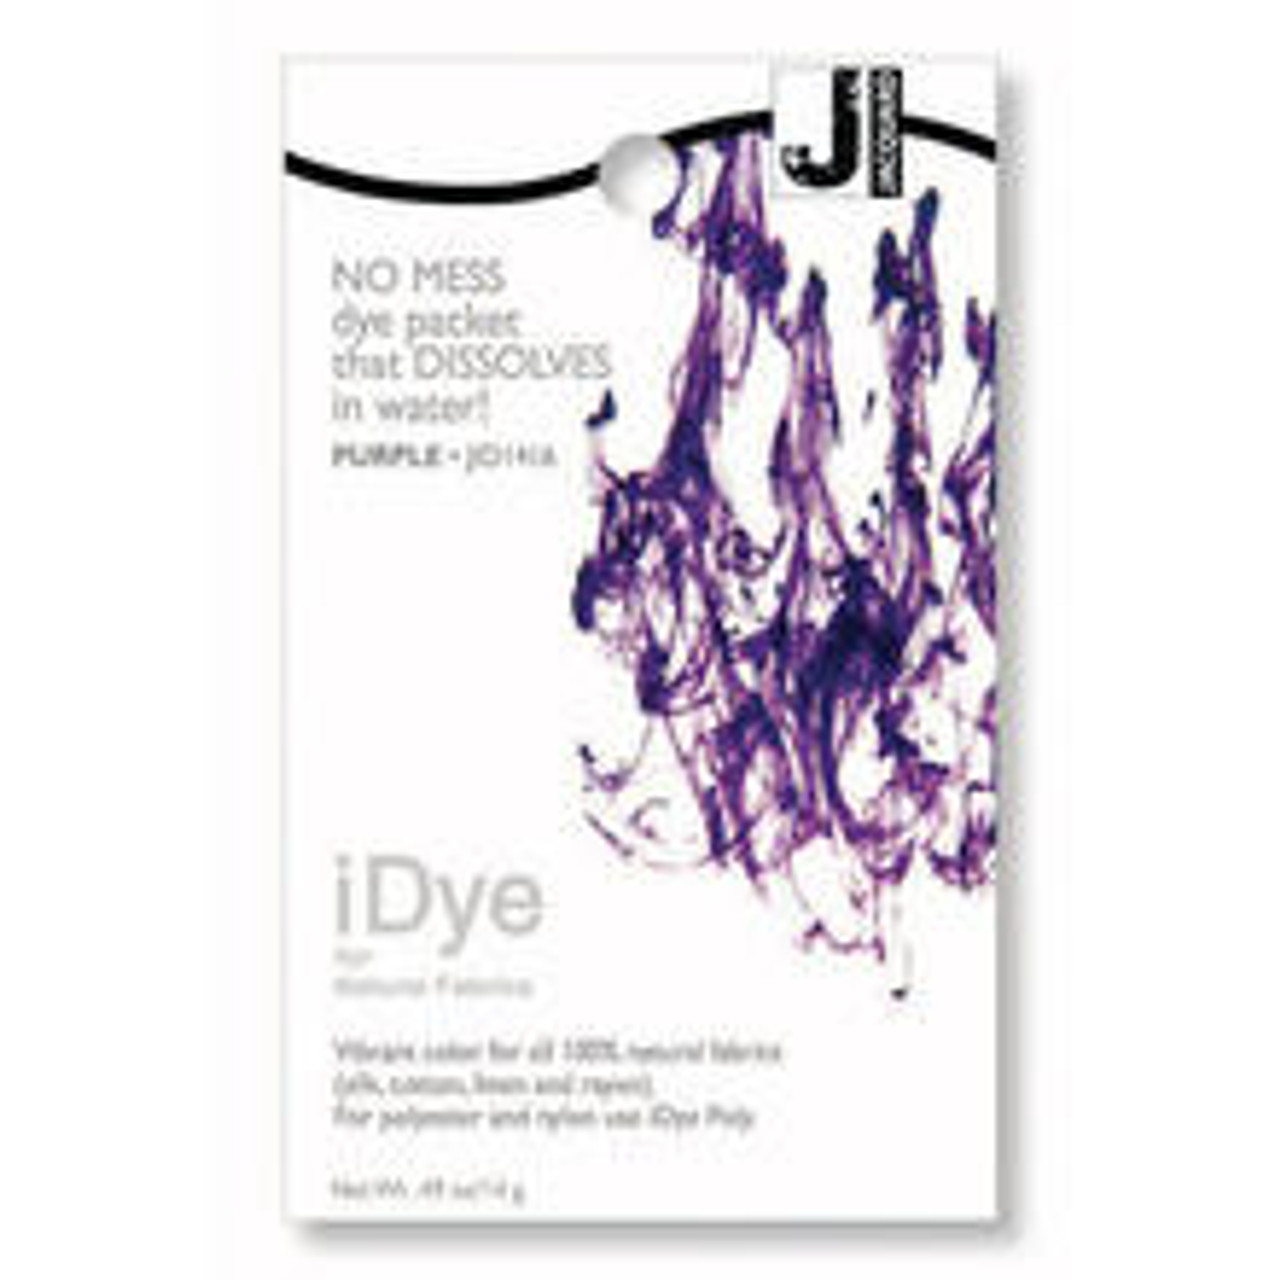 Idye for Natural and Poly Fabrics 